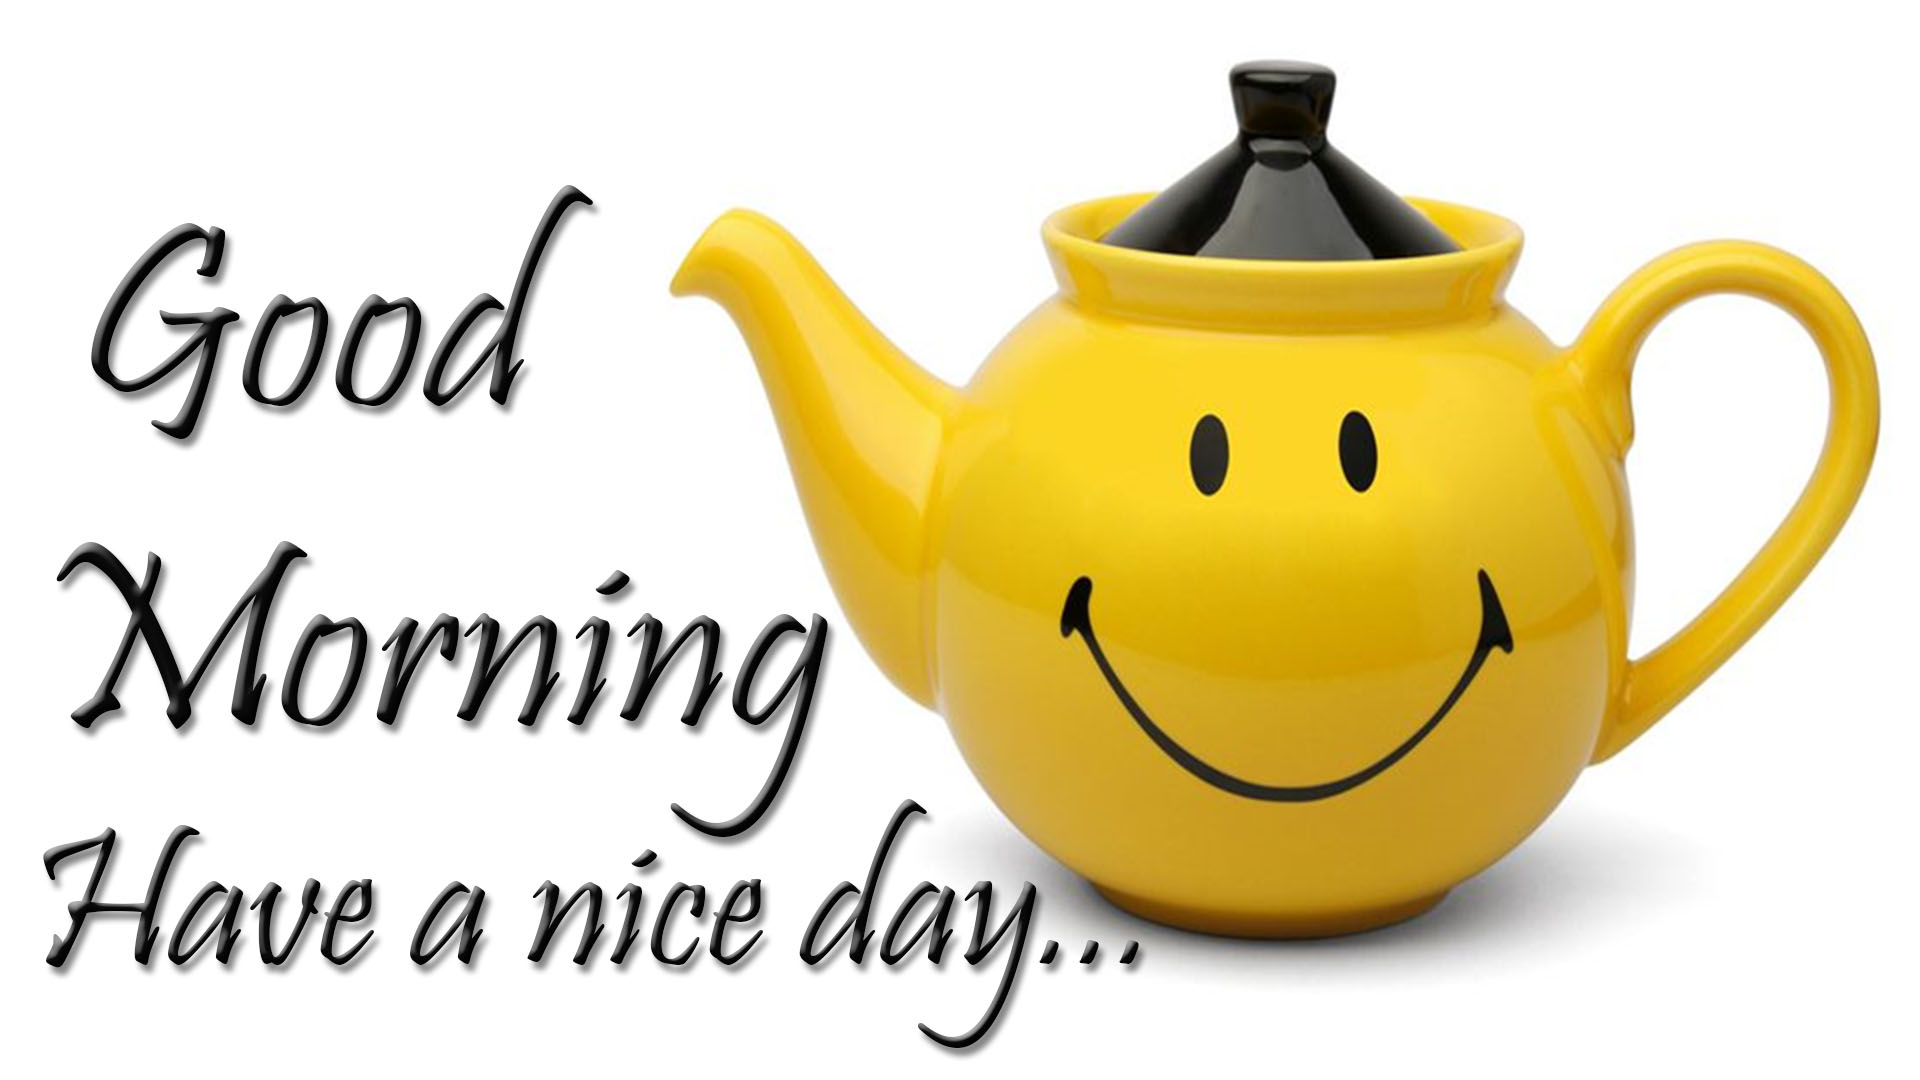 Good Morning Images Hd - Teapot , HD Wallpaper & Backgrounds